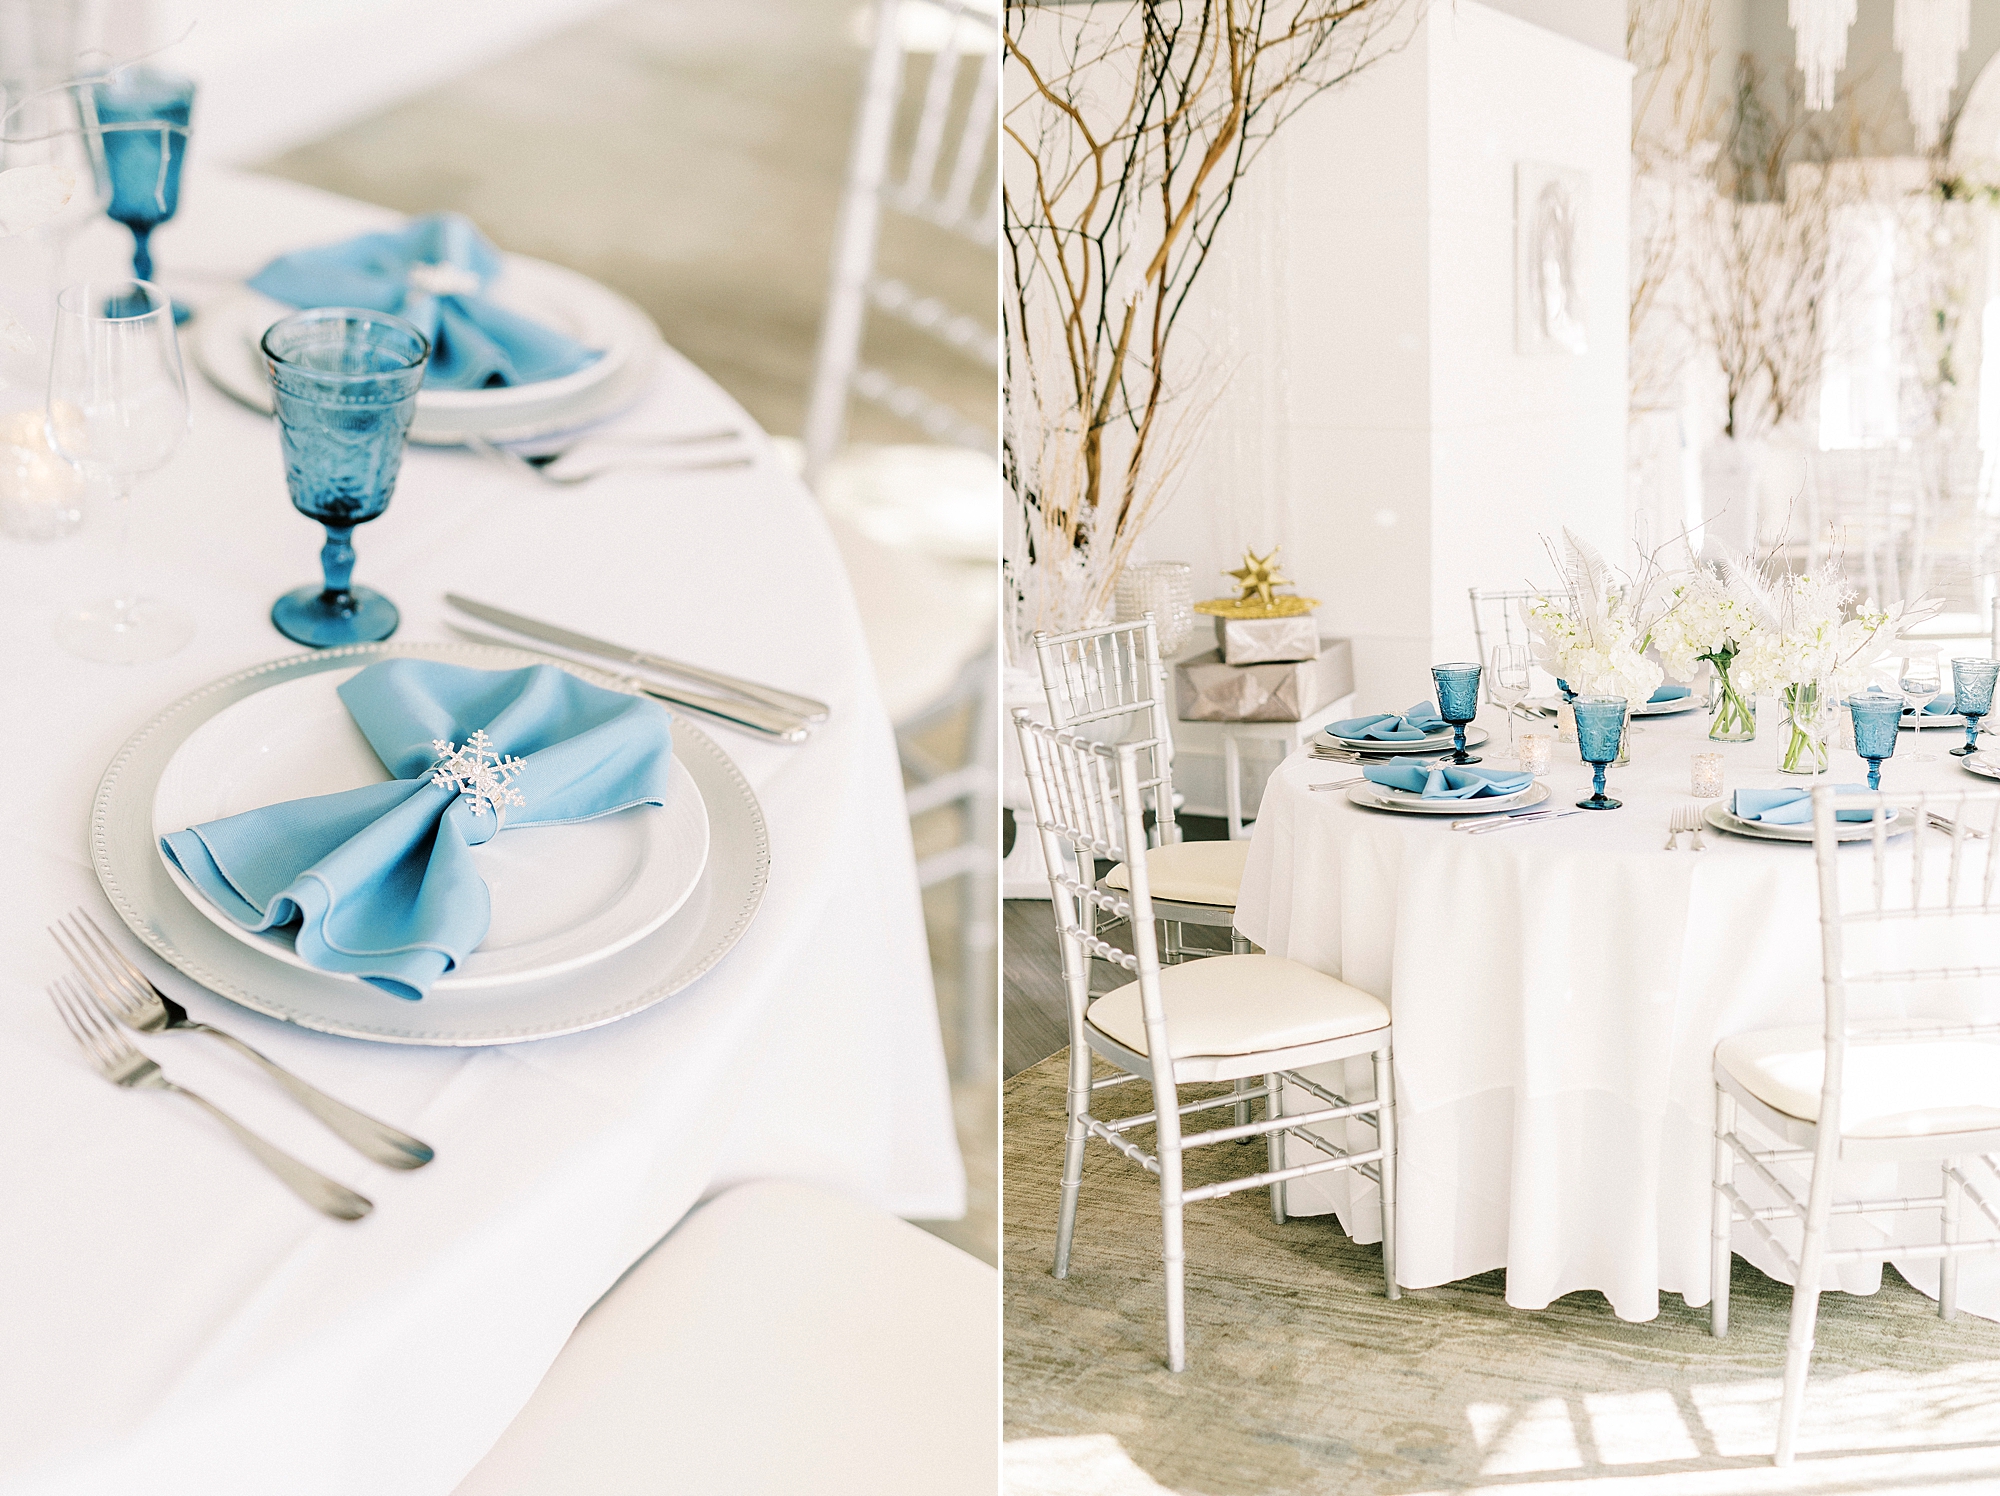 Winter Wonderland wedding at River Run Country Club with blue and ivory details 